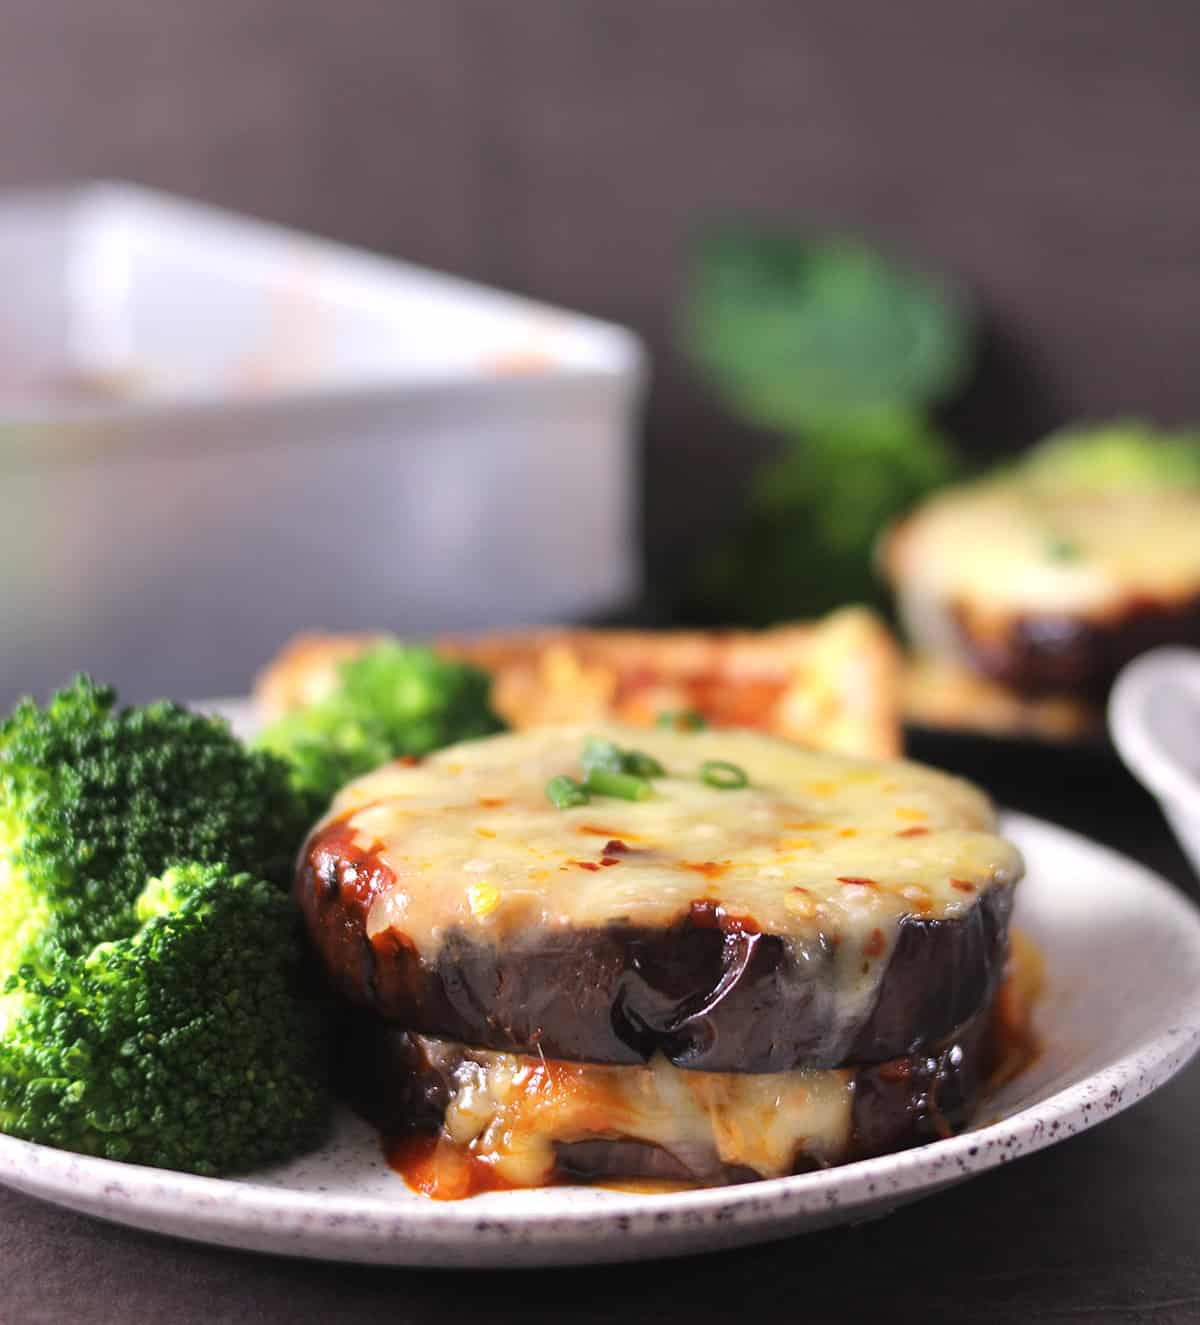 Cheesy eggplant served with steamed broccoli and bread toast, meal under 500 calories